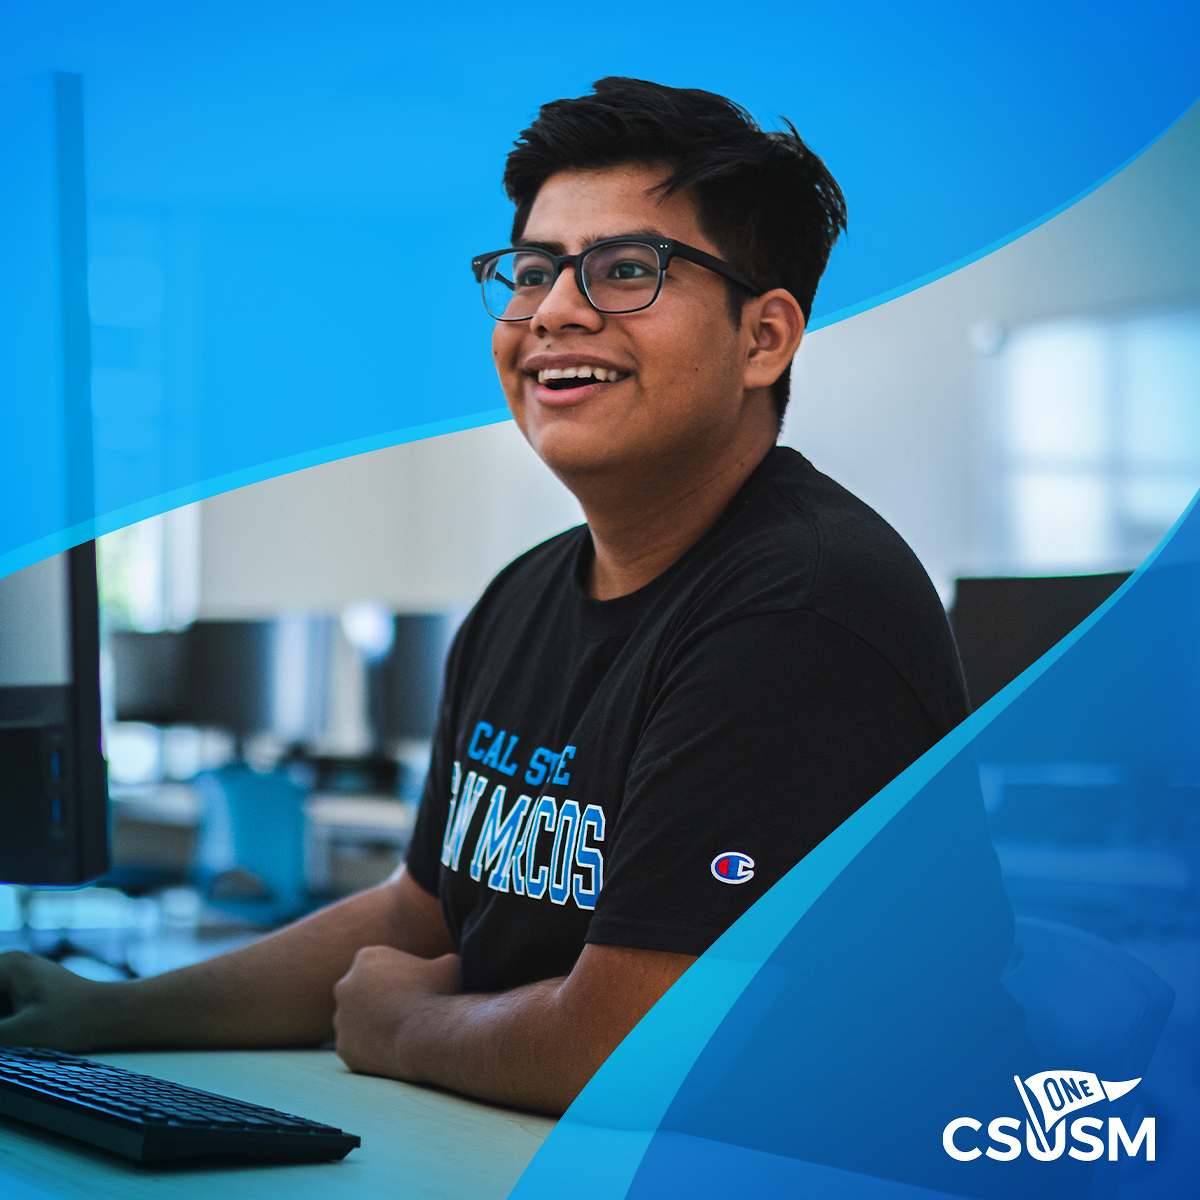 Today is the day! Carry the flag for our students with a gift to scholarships. Every gift made to the General Scholarship Fund at CSUSM could help a student at just the right time. They need your support. Give and help spread the word at csusm.edu/onecsusm. #OneCSUSM